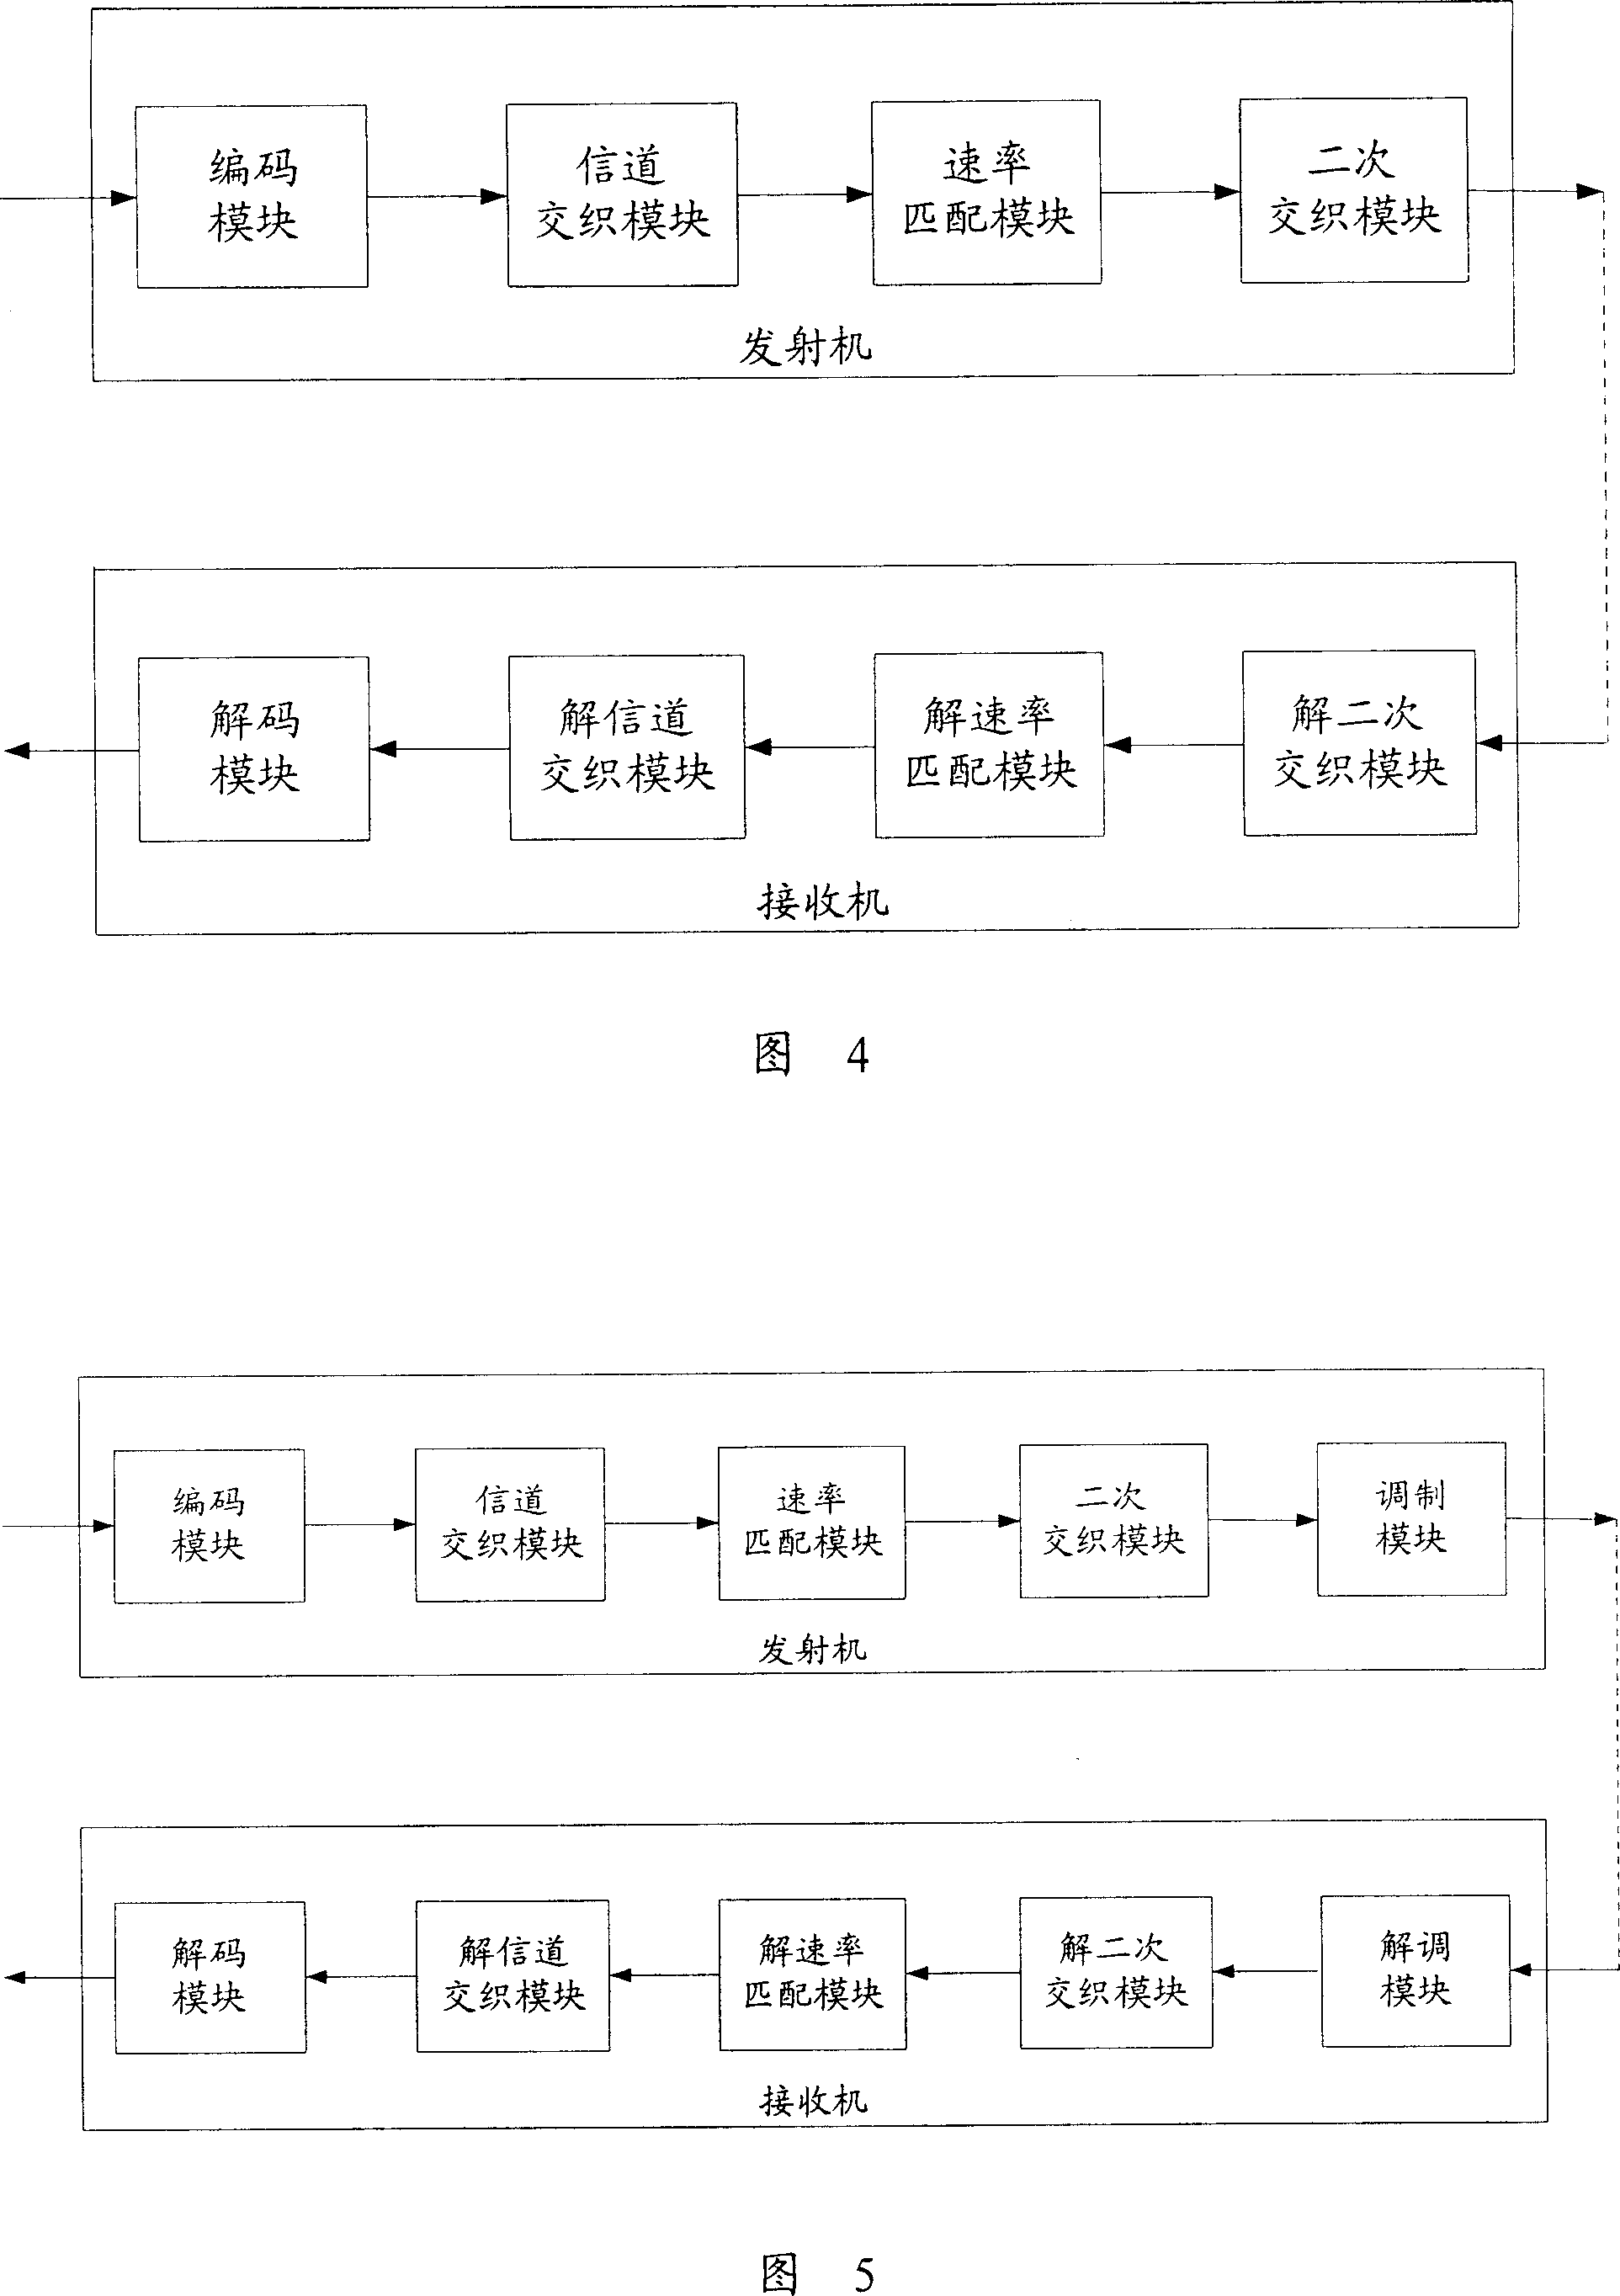 Method and system for transmitting information